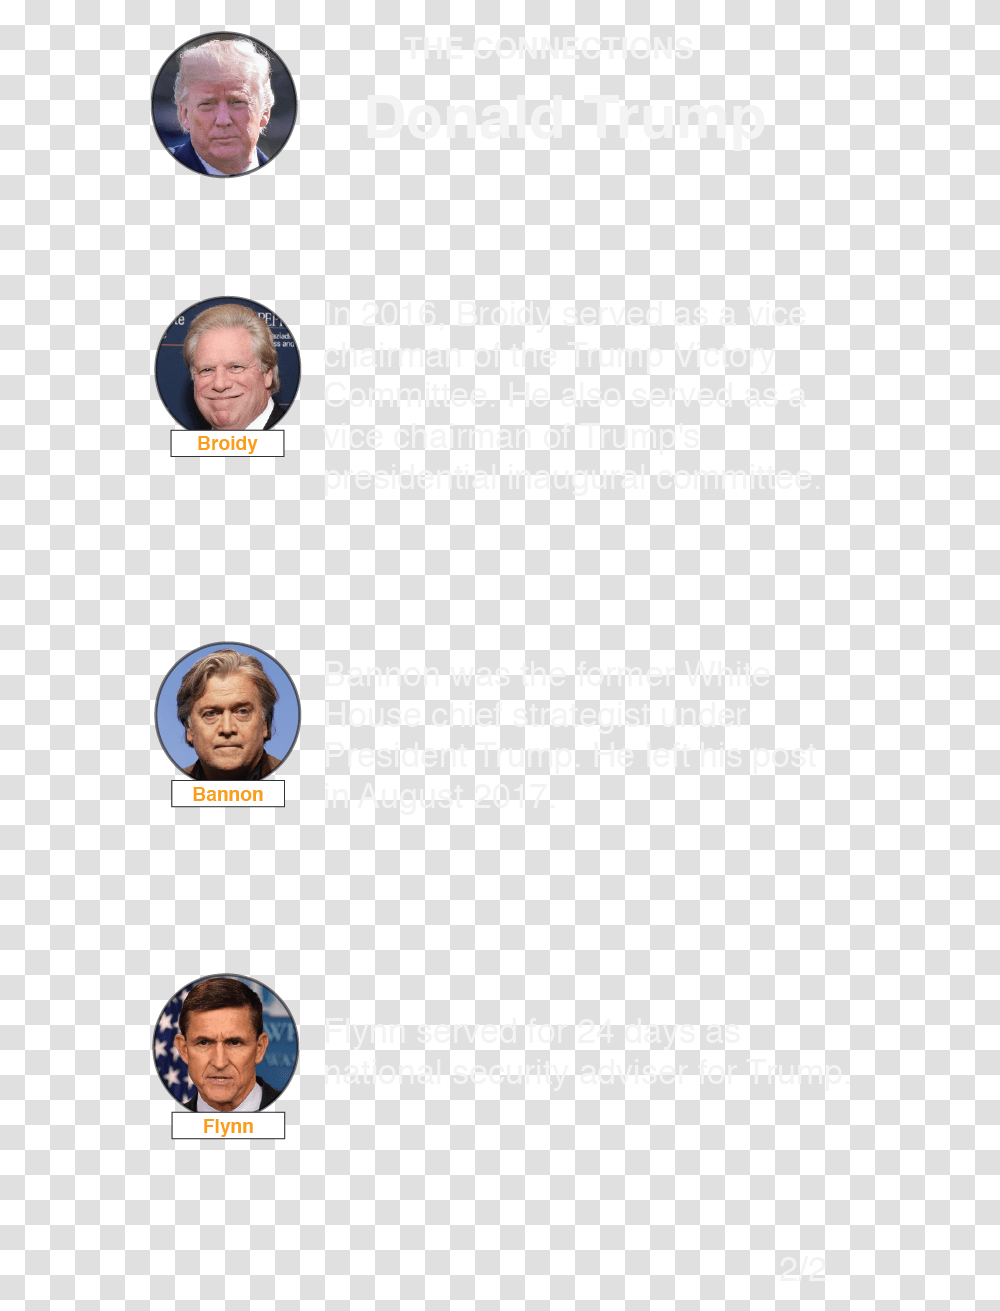 Web The Uae Trump Connection Document, Person, Text, Face, People Transparent Png